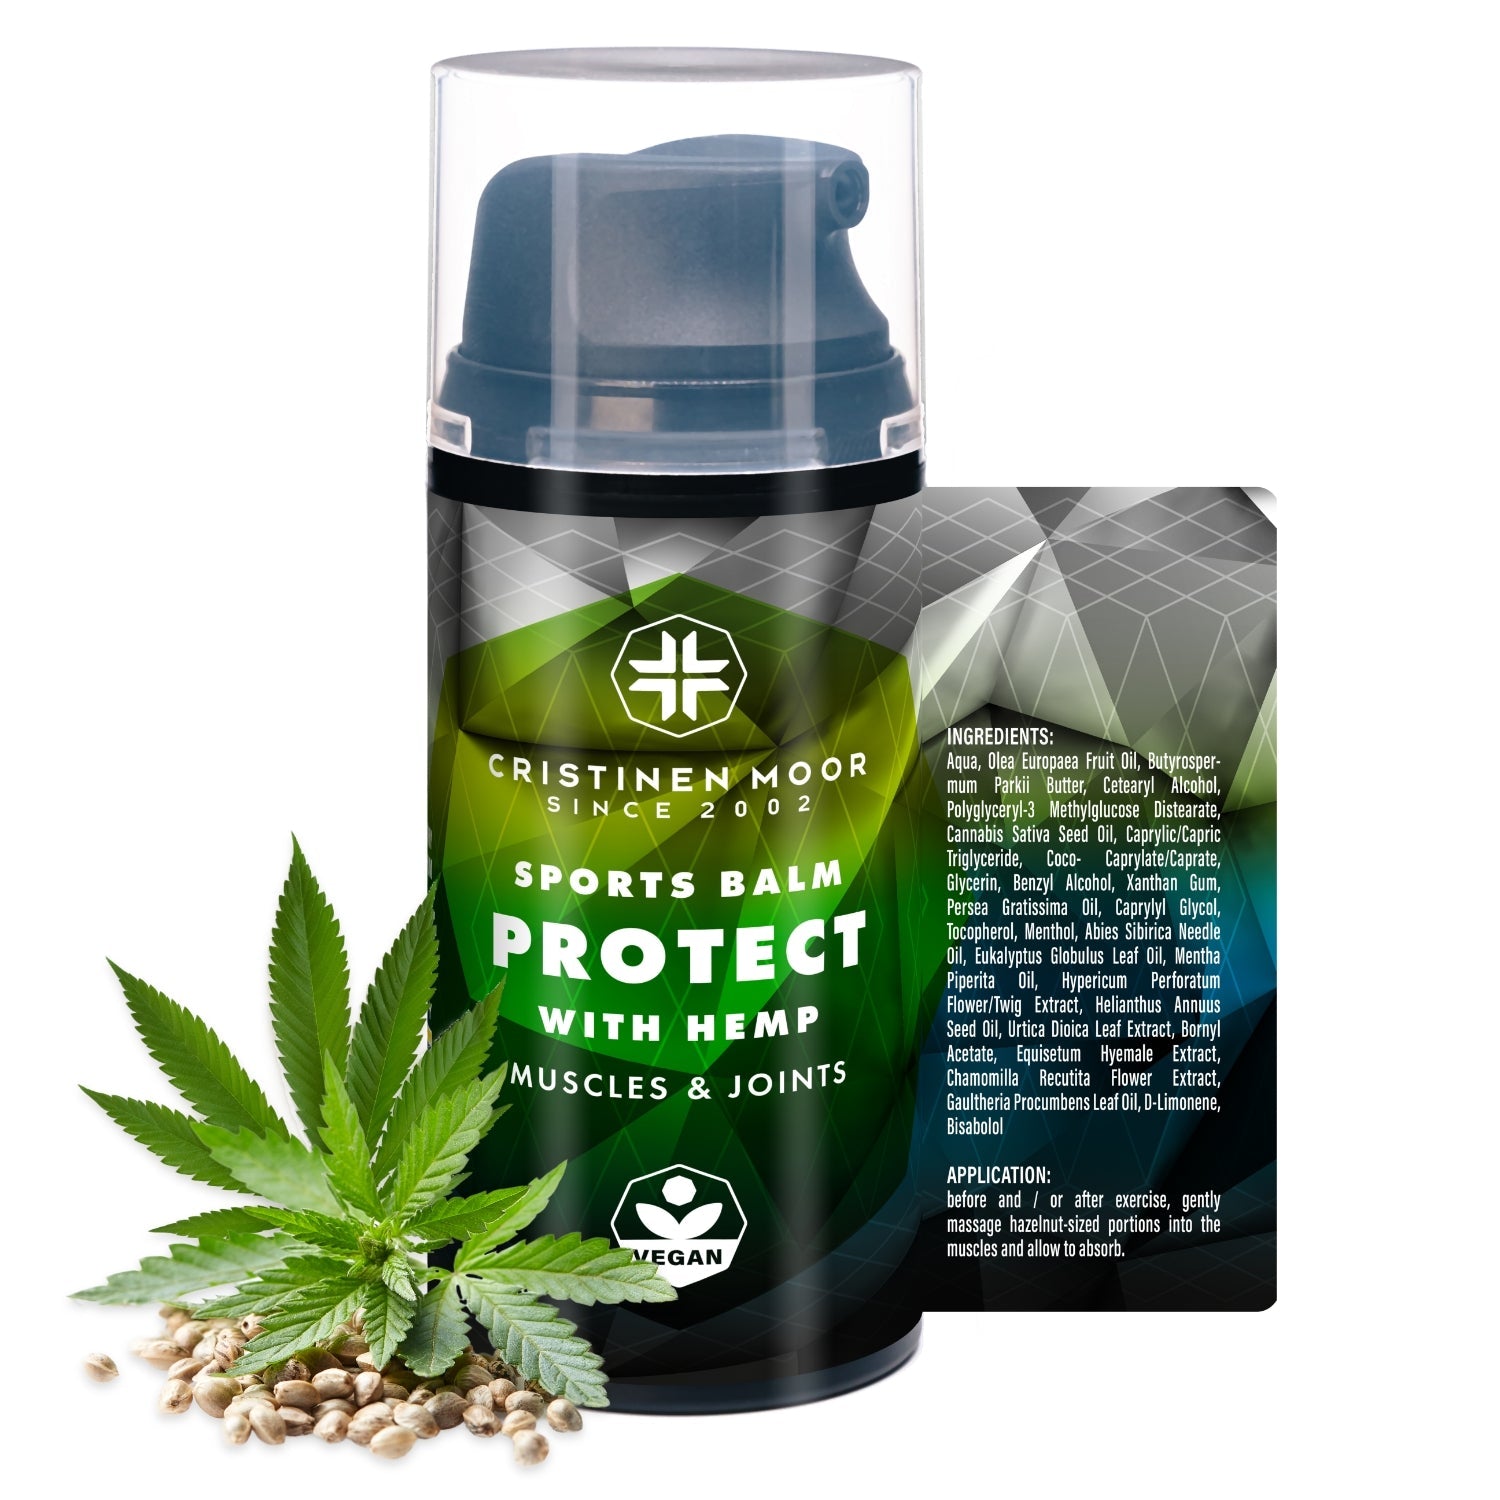 Sports Balm Protect - Front